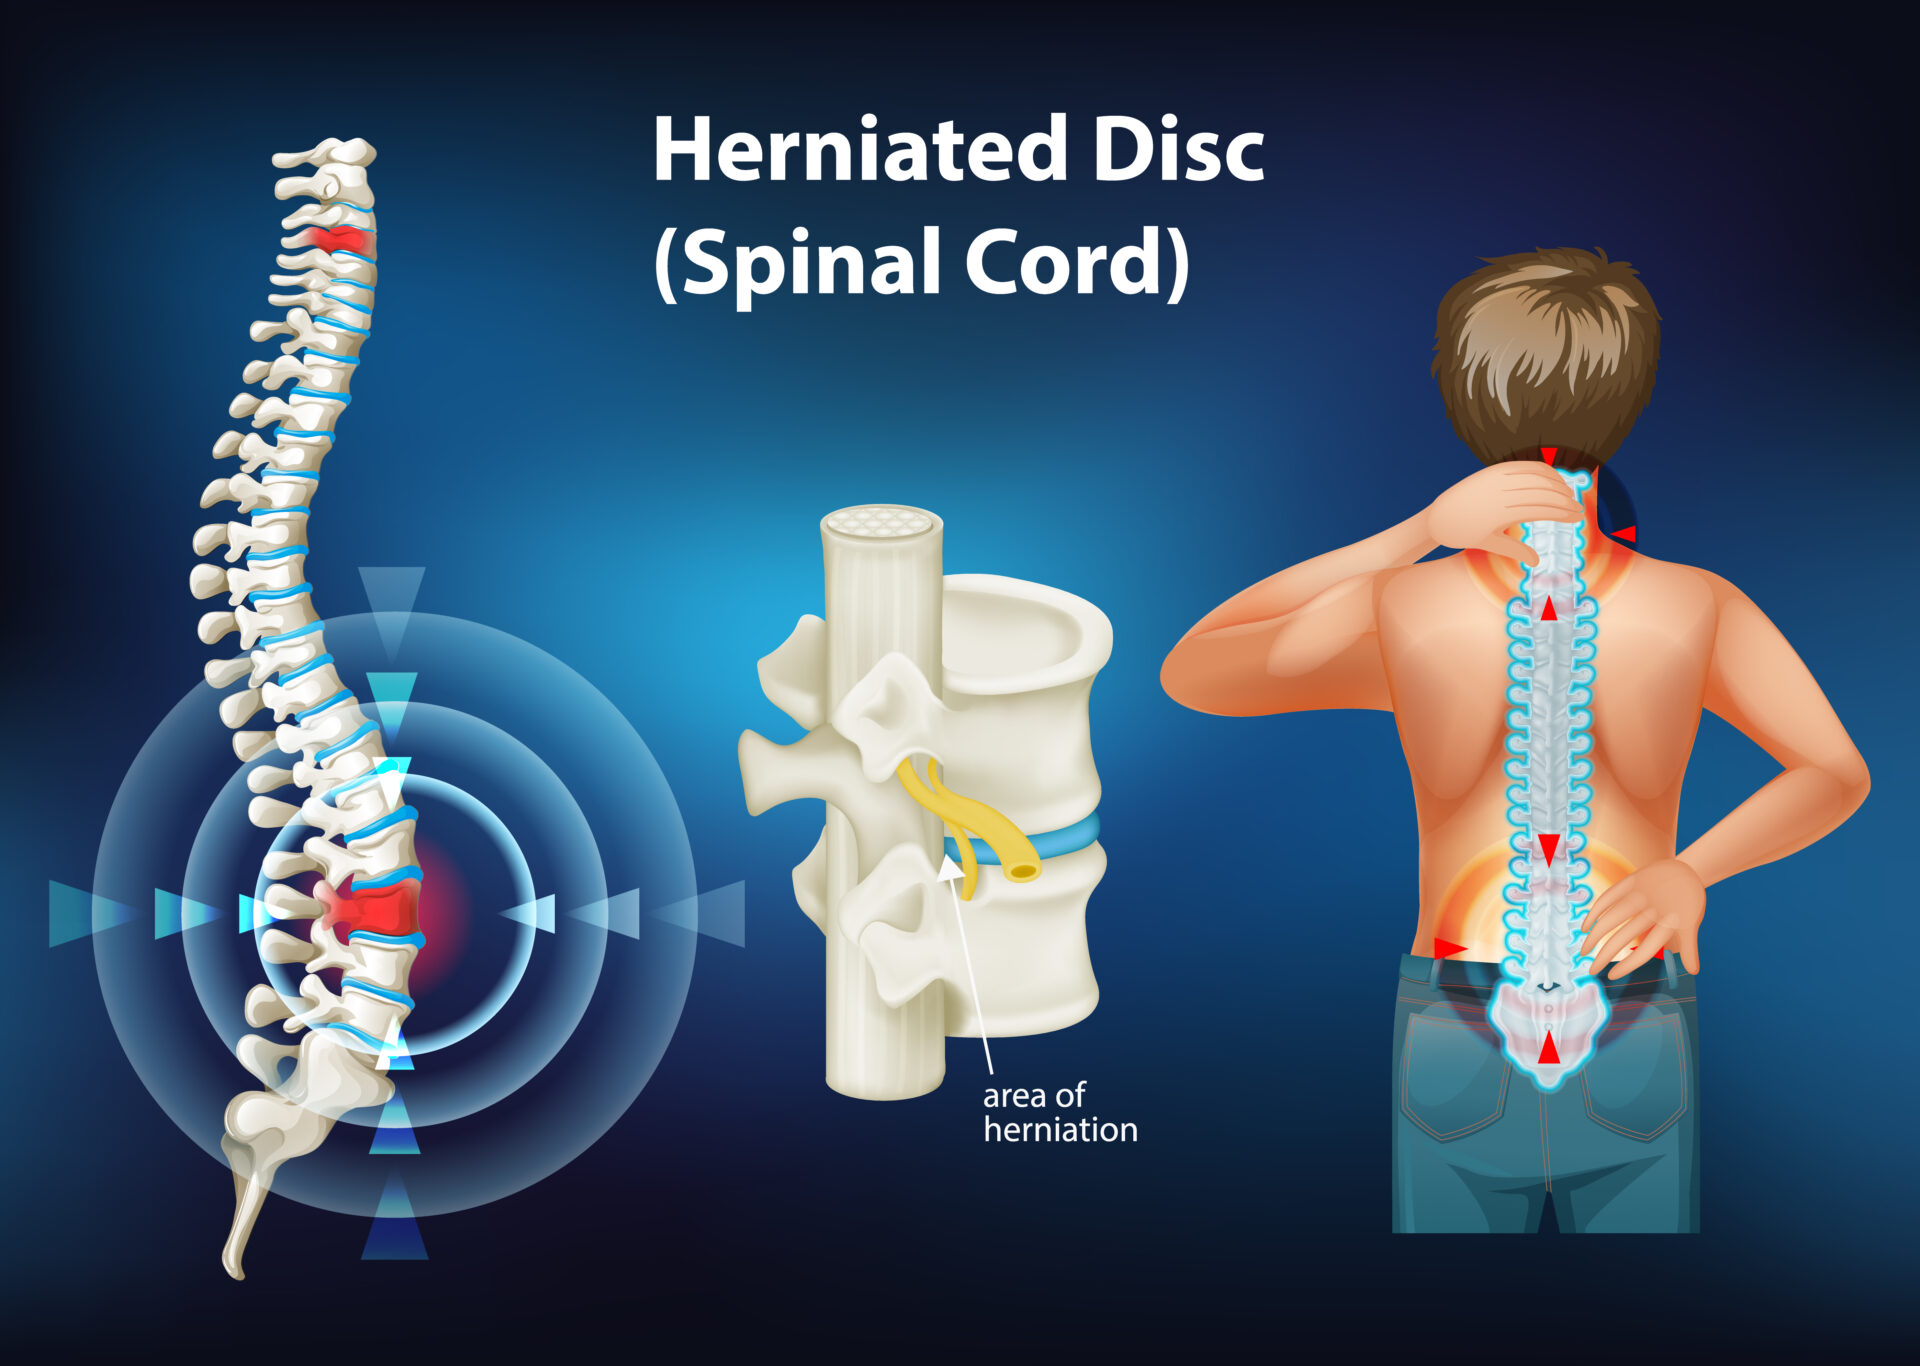 Can i run with a herniated disc